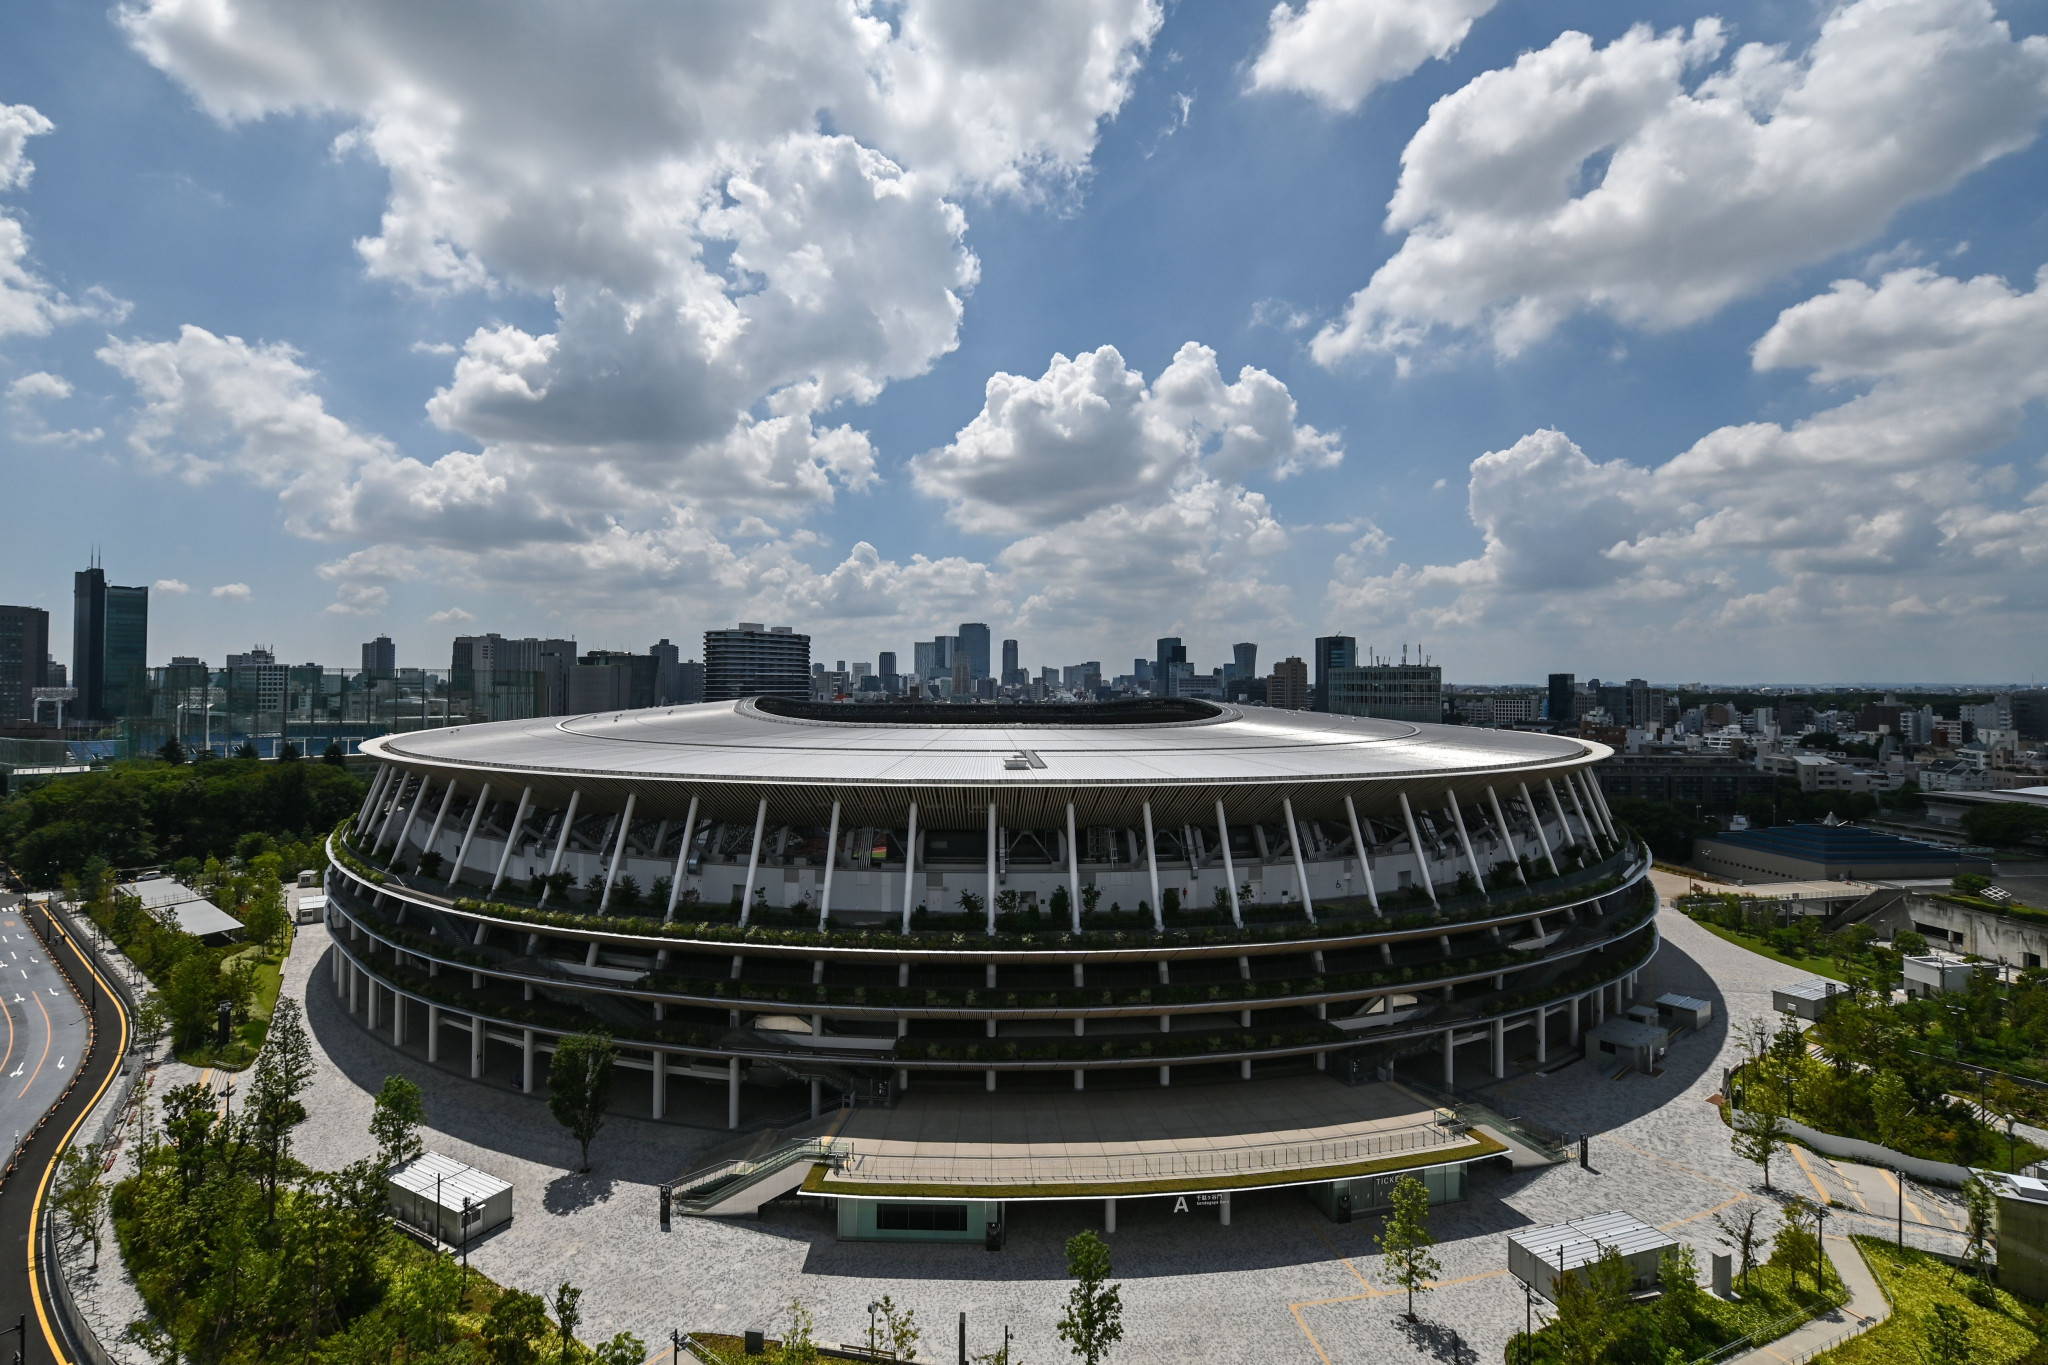 The National Stadium in Tokyo is set to host the Opening and Closing Ceremonies of next year's Olympic and Paralympic Games ©Getty Images